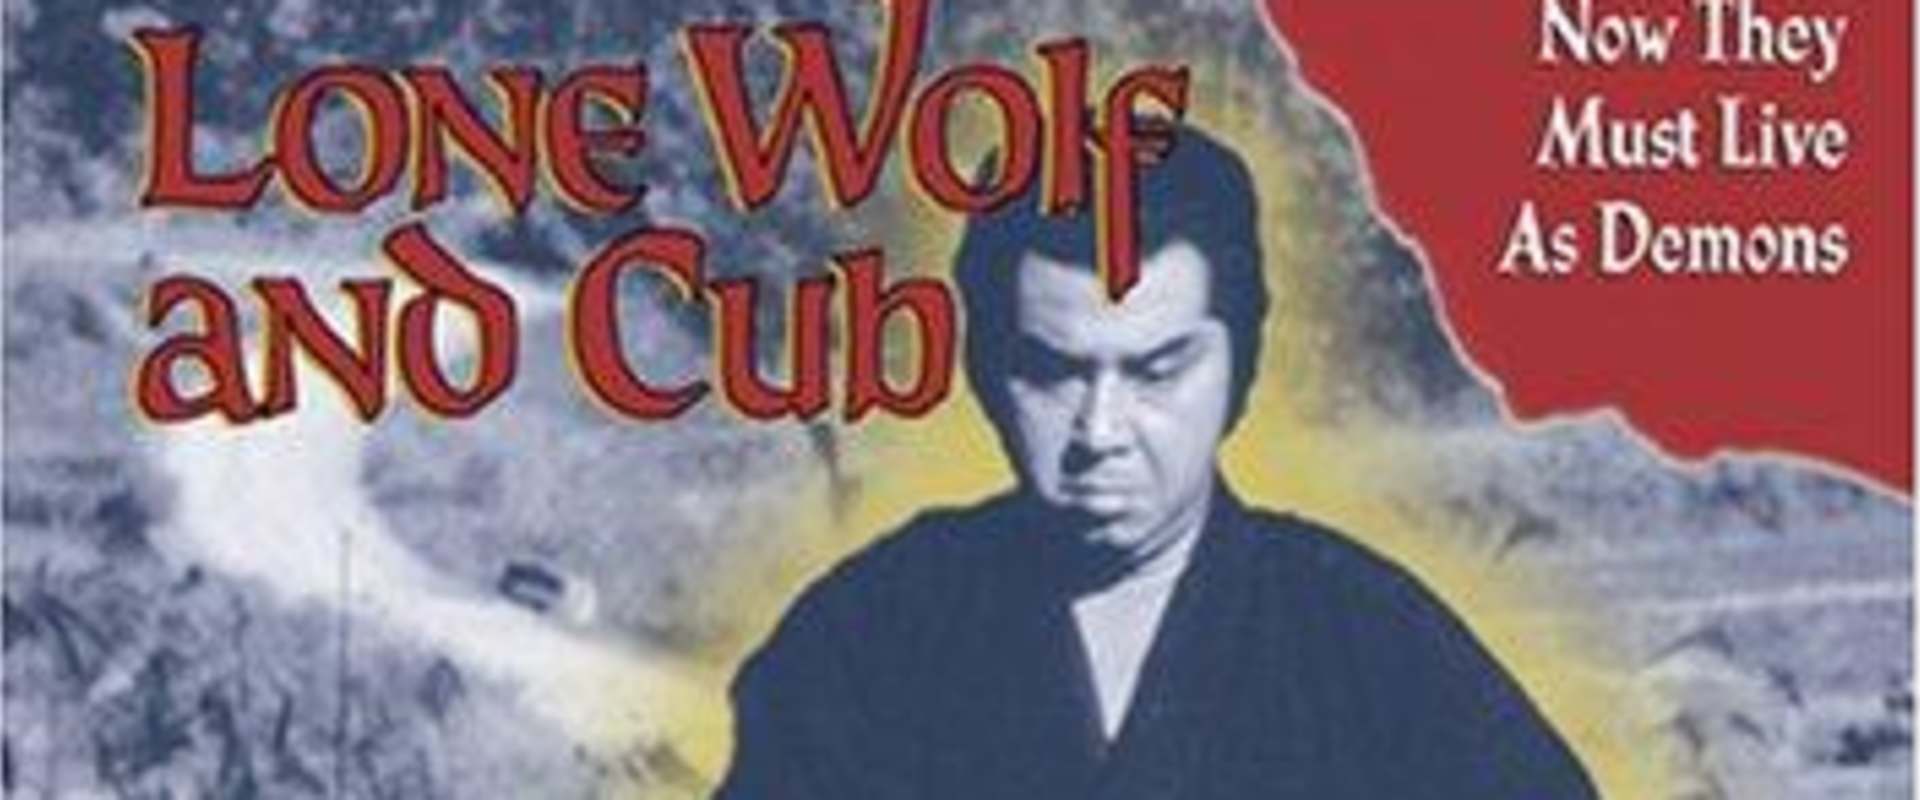 Lone Wolf and Cub: Baby Cart in Peril background 1